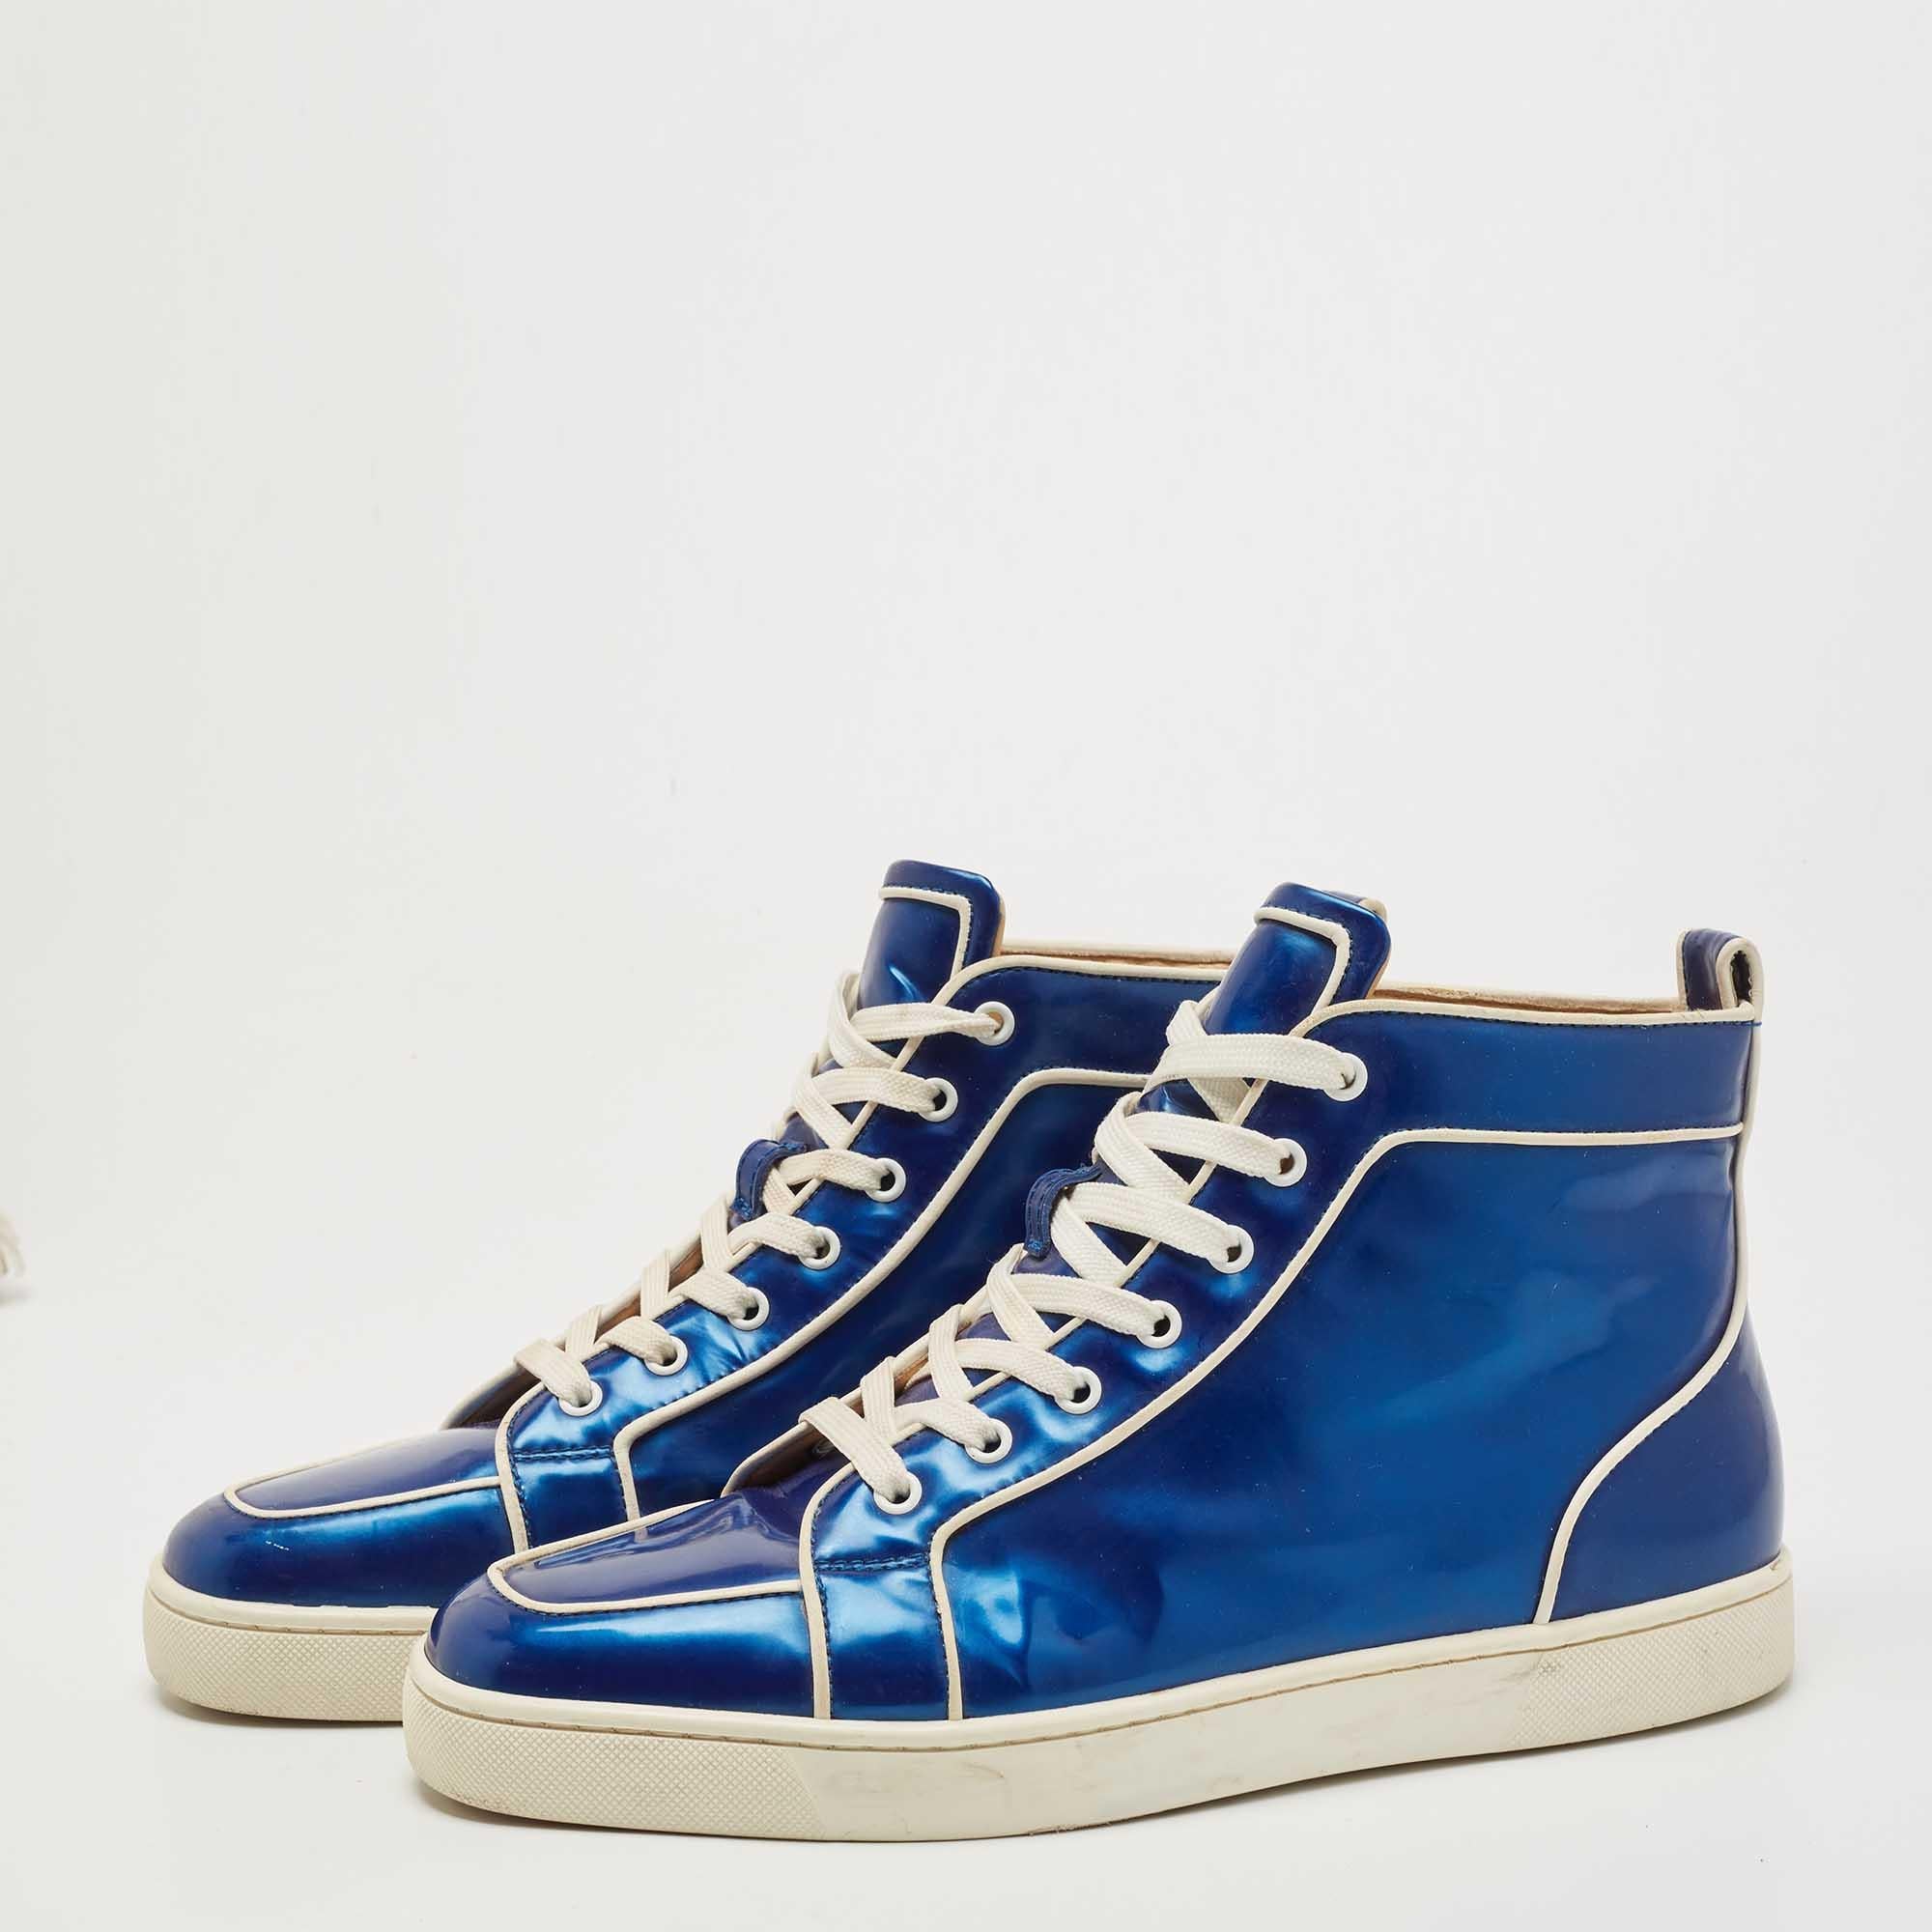 Men's Christian Louboutin Blue Patent Leather Rantus Orlato High Top Sneakers Size 44